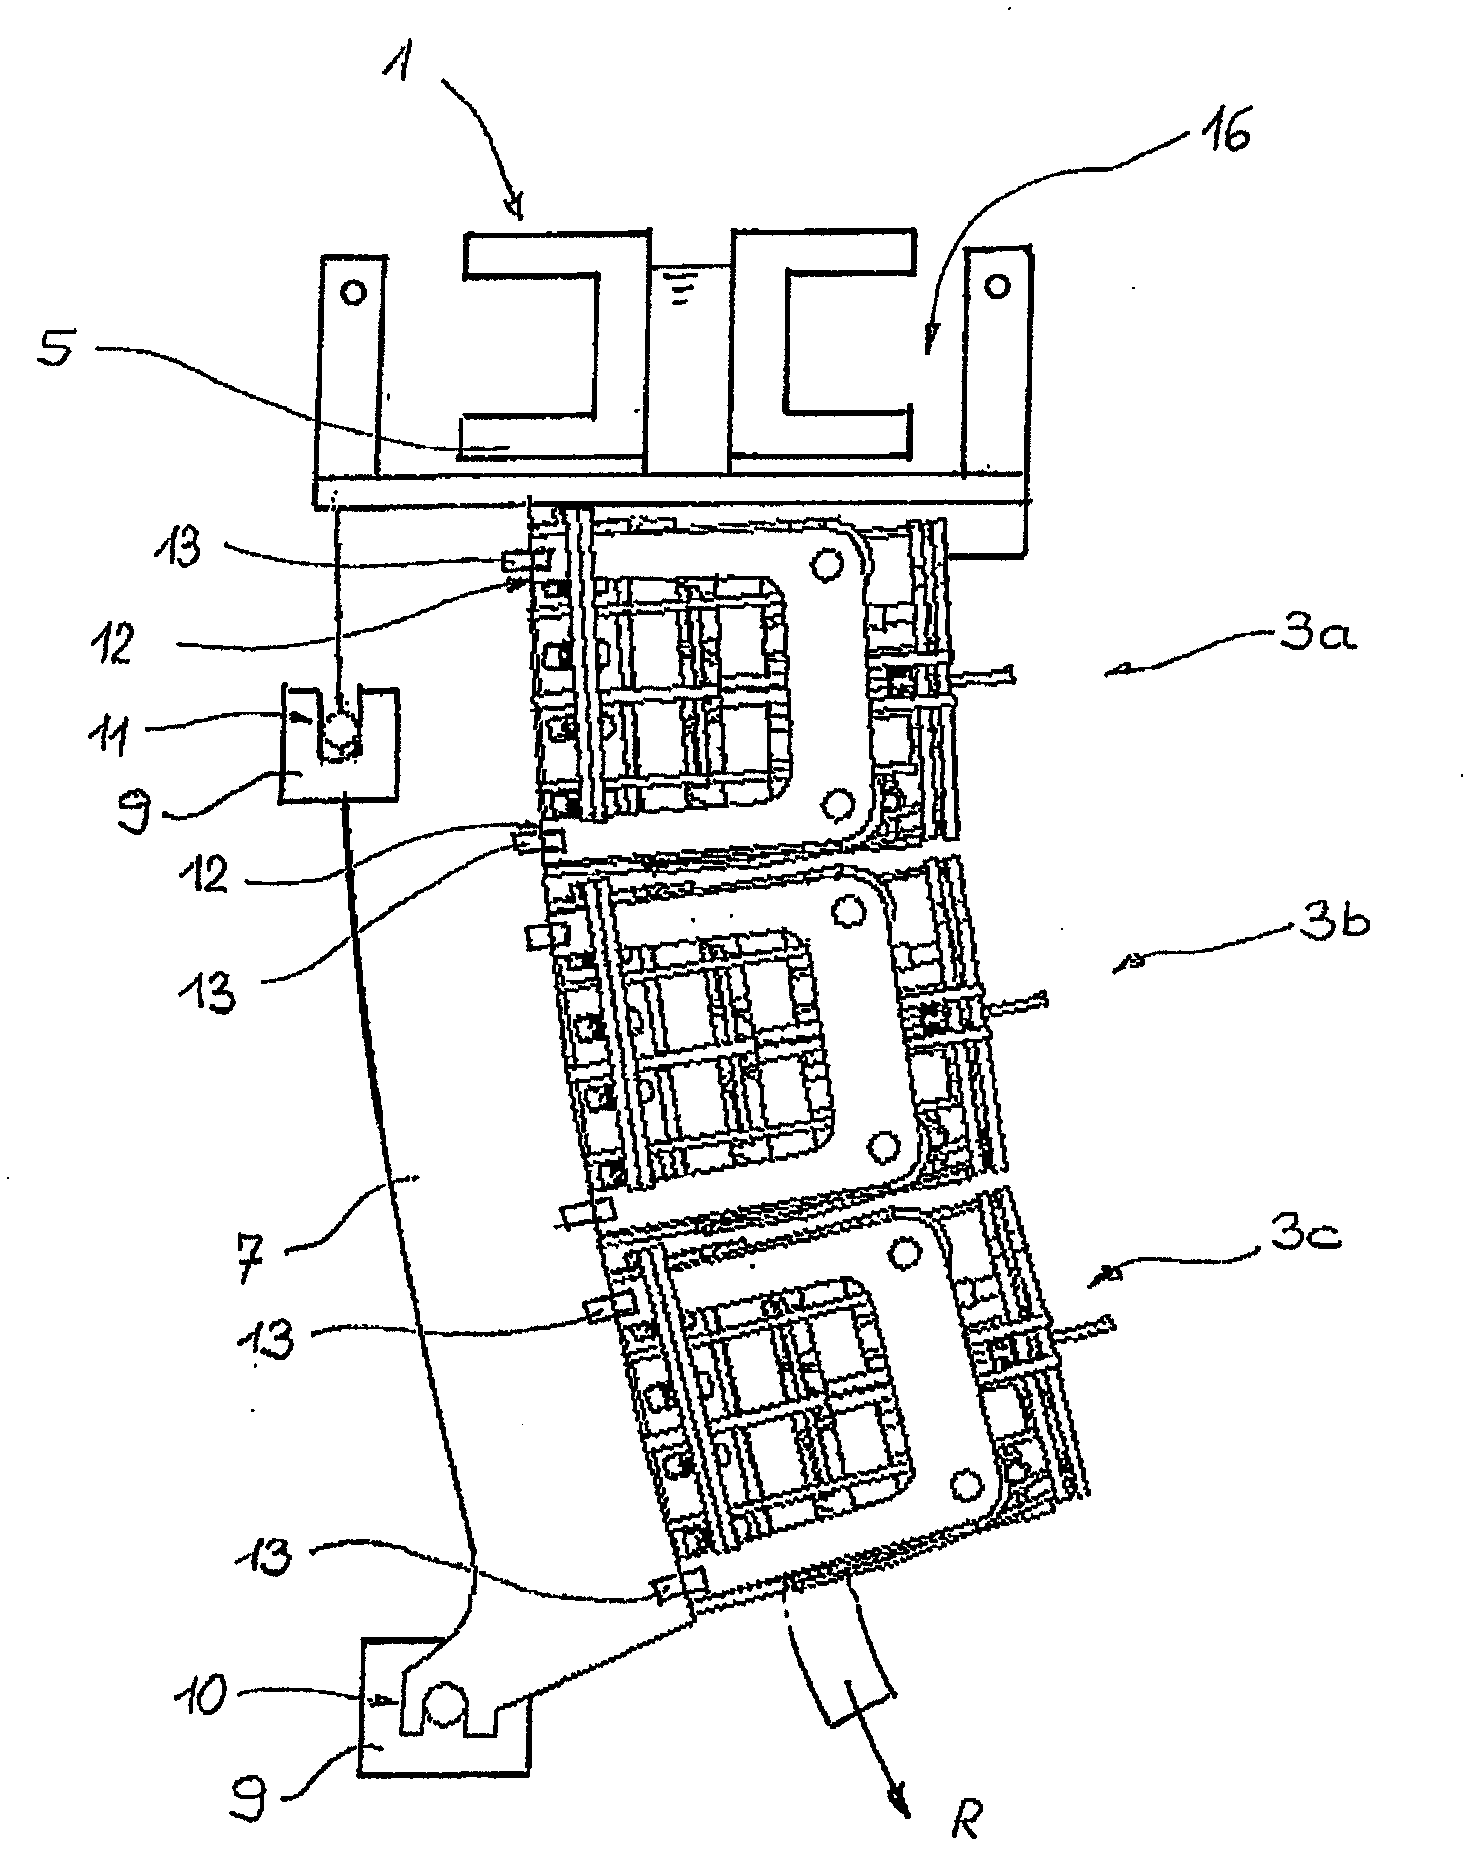 Continuous casting system for casting metal strand having billet or bloom cross-section